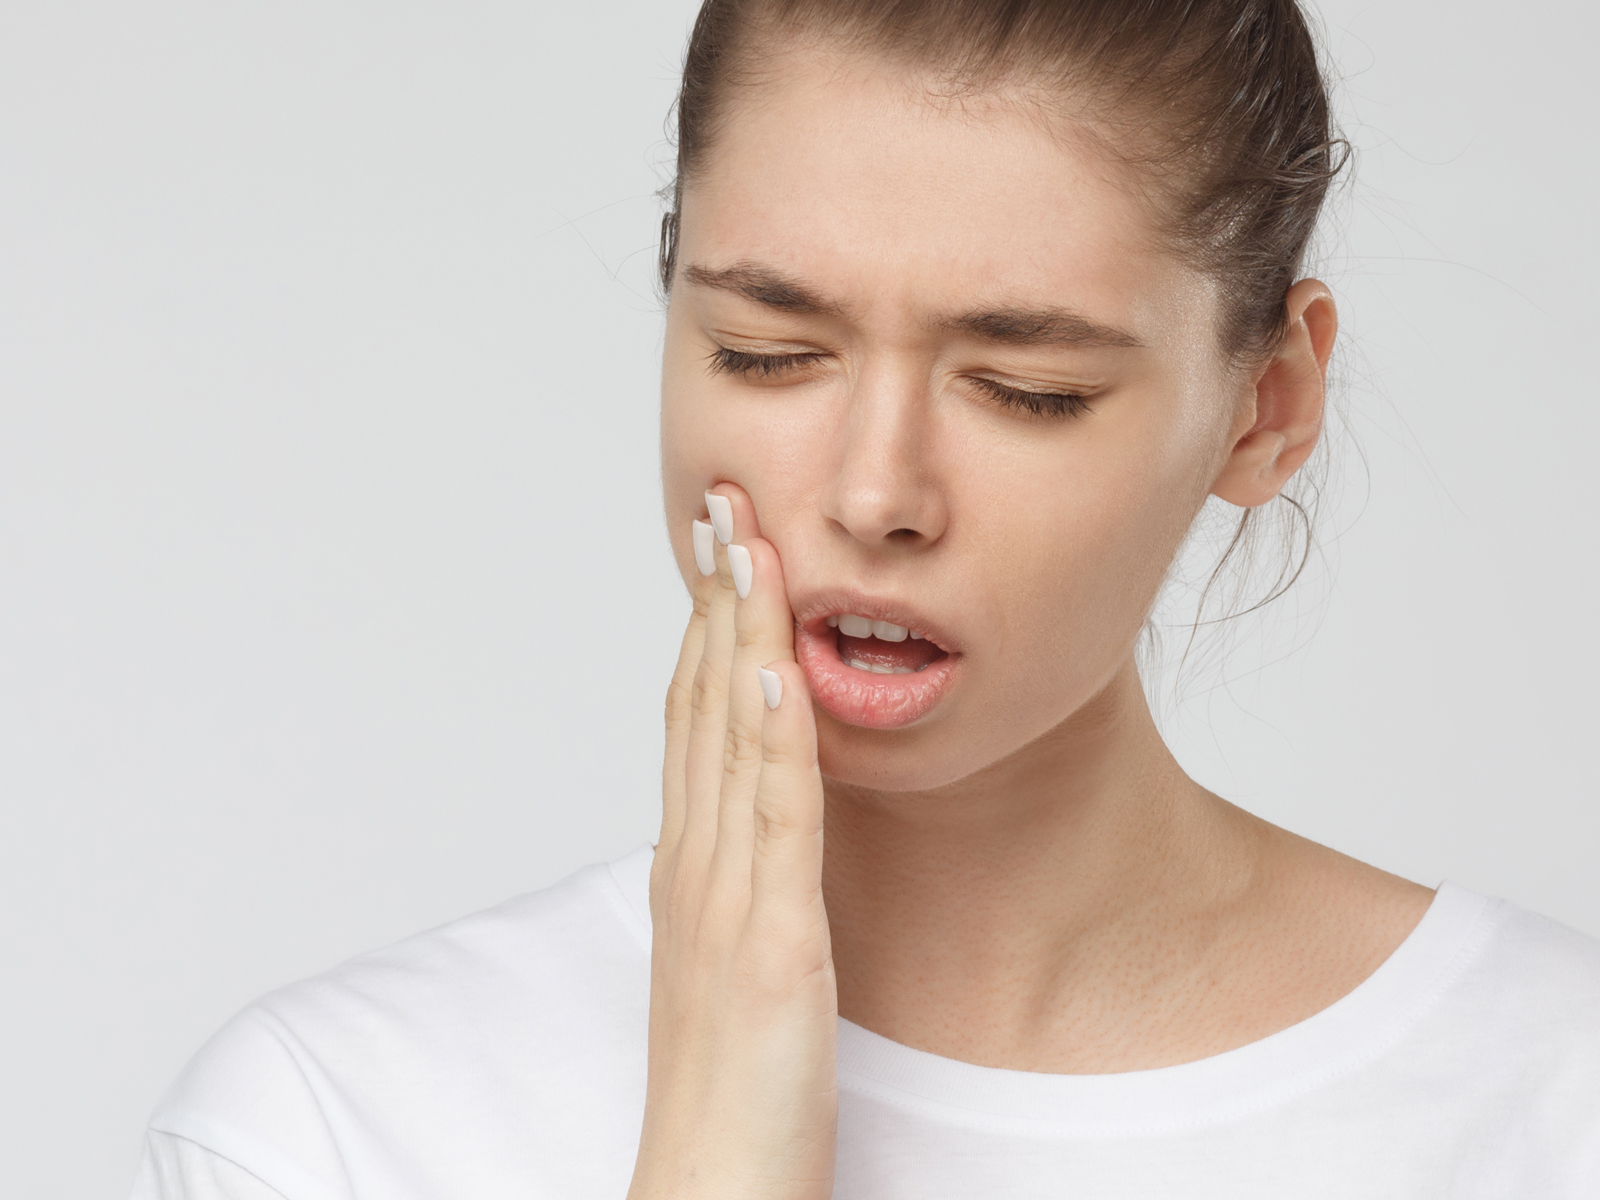 Can a Toothache Go Away on its Own?